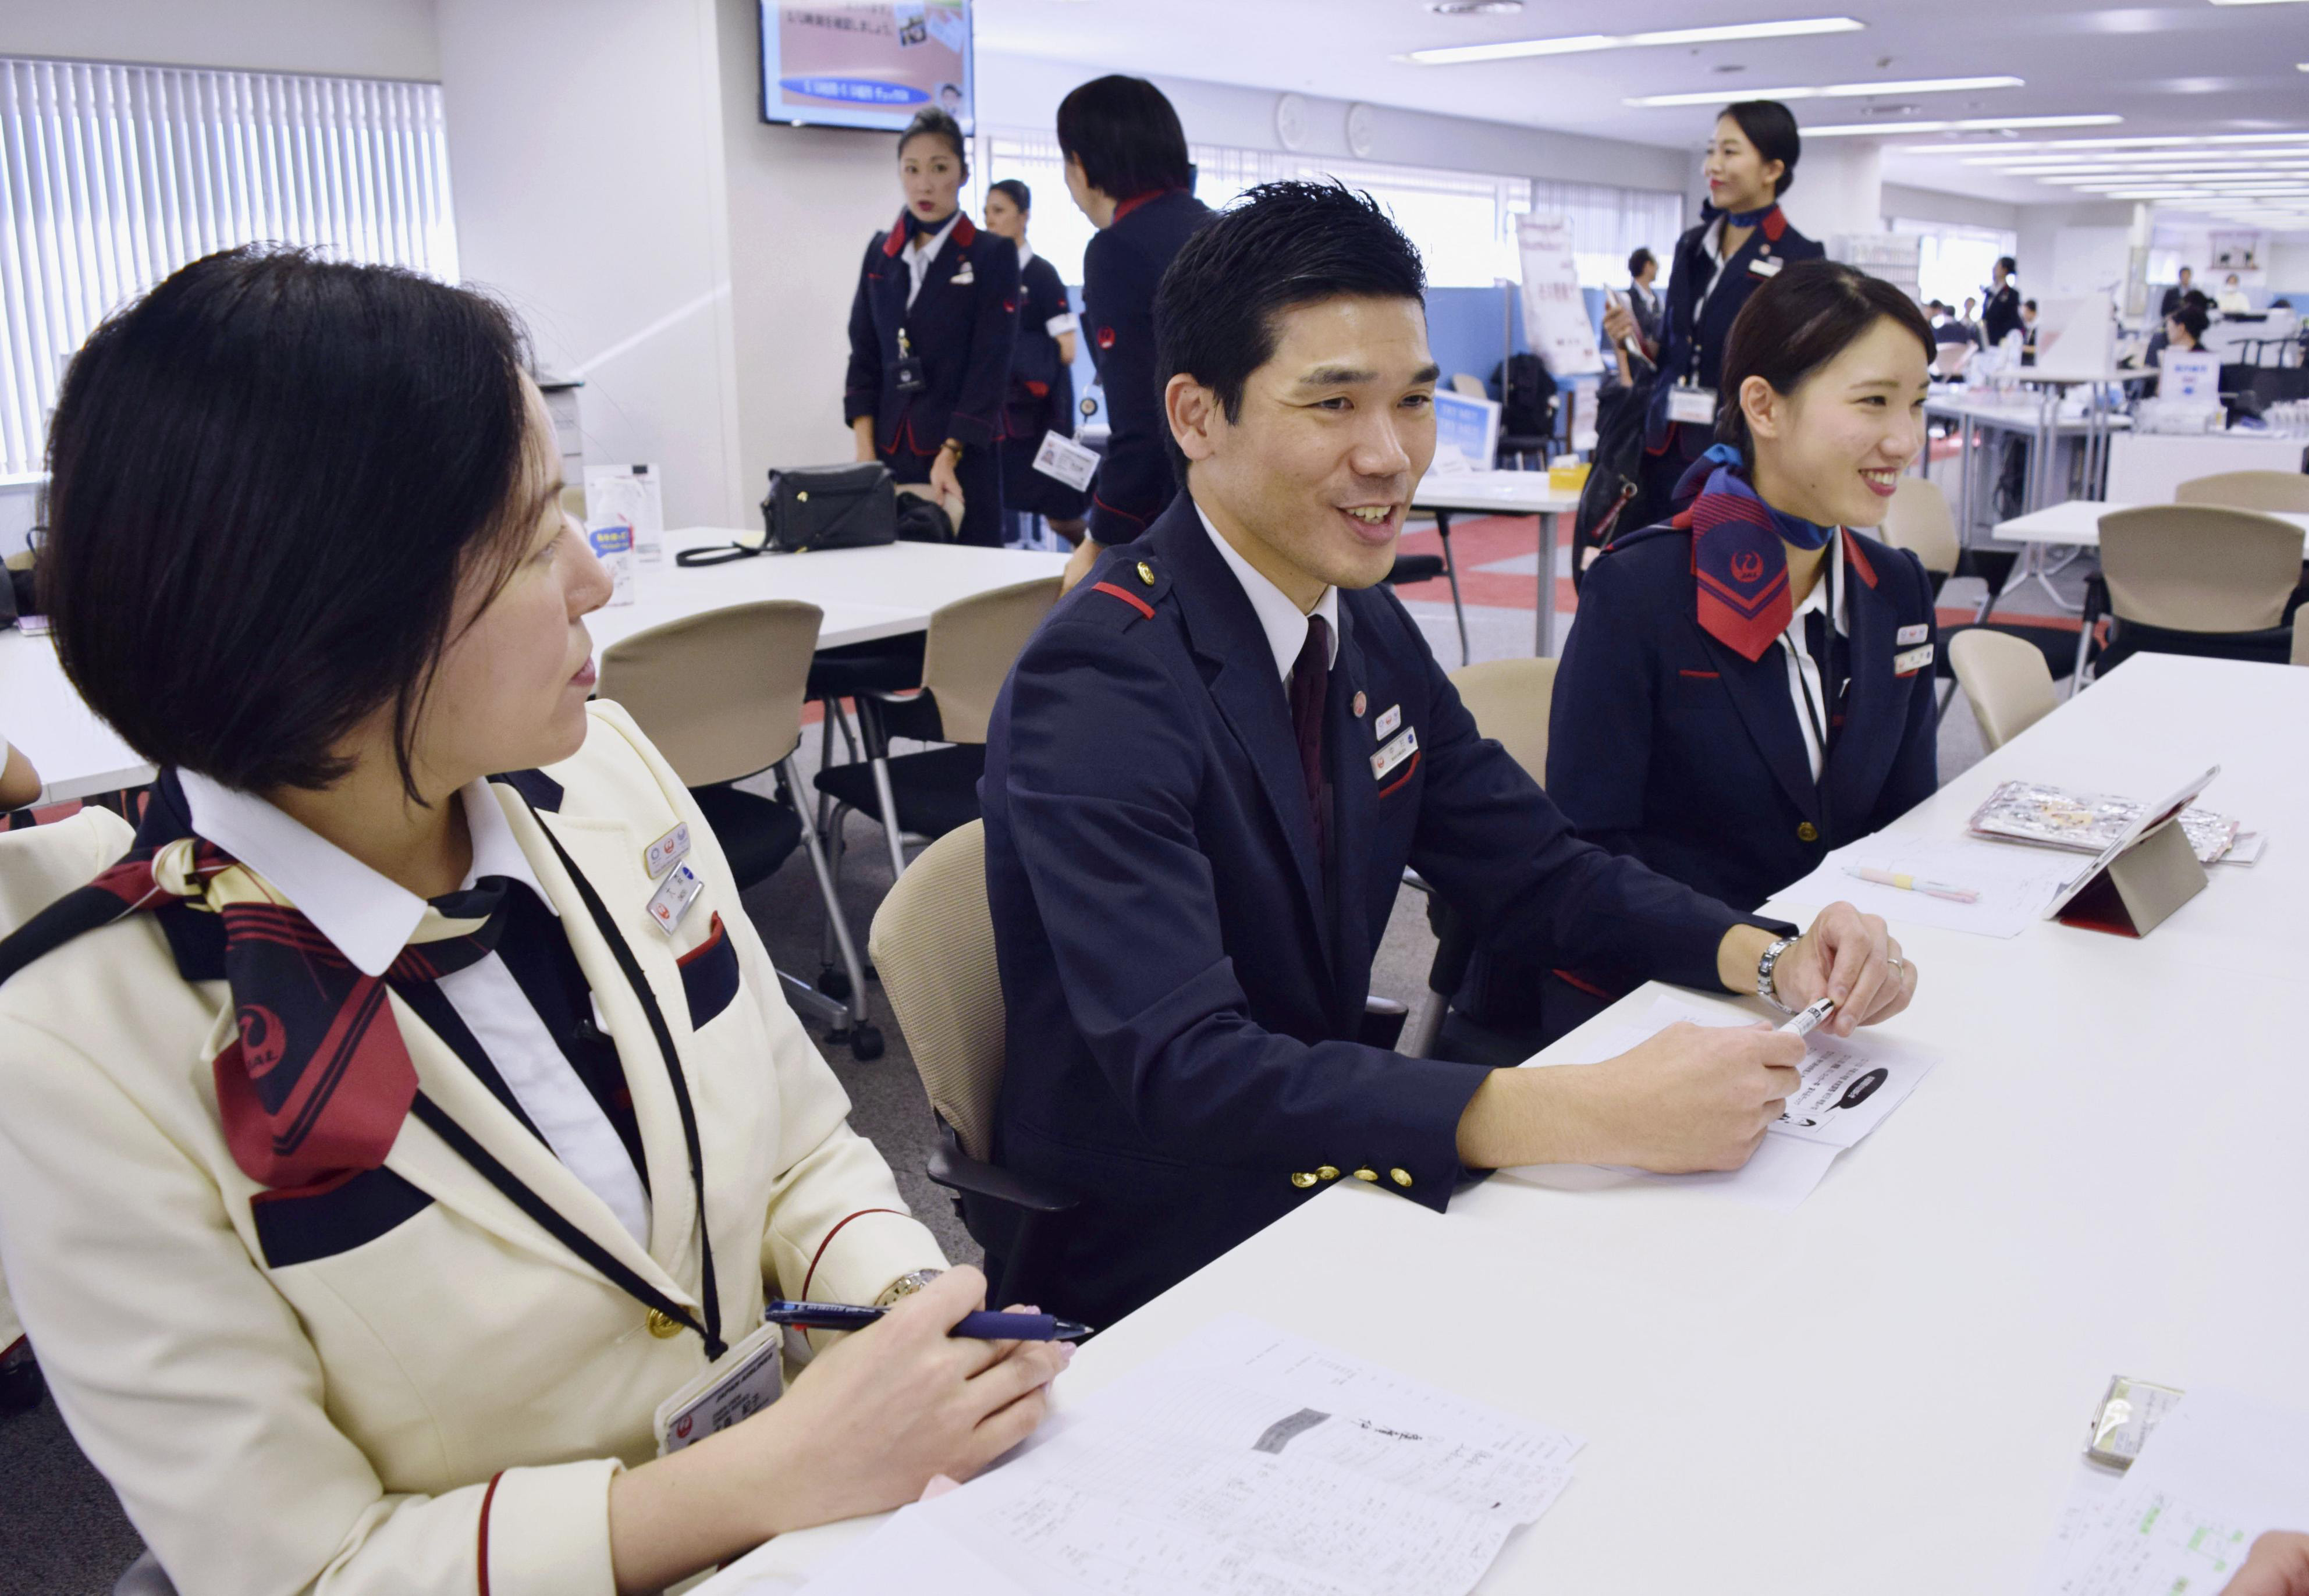 Japan Airline Co. flight attendant Hiroki Nakamura (center) talks with colleagues at a meeting in November at Tokyo’s Haneda airport. | KYODO